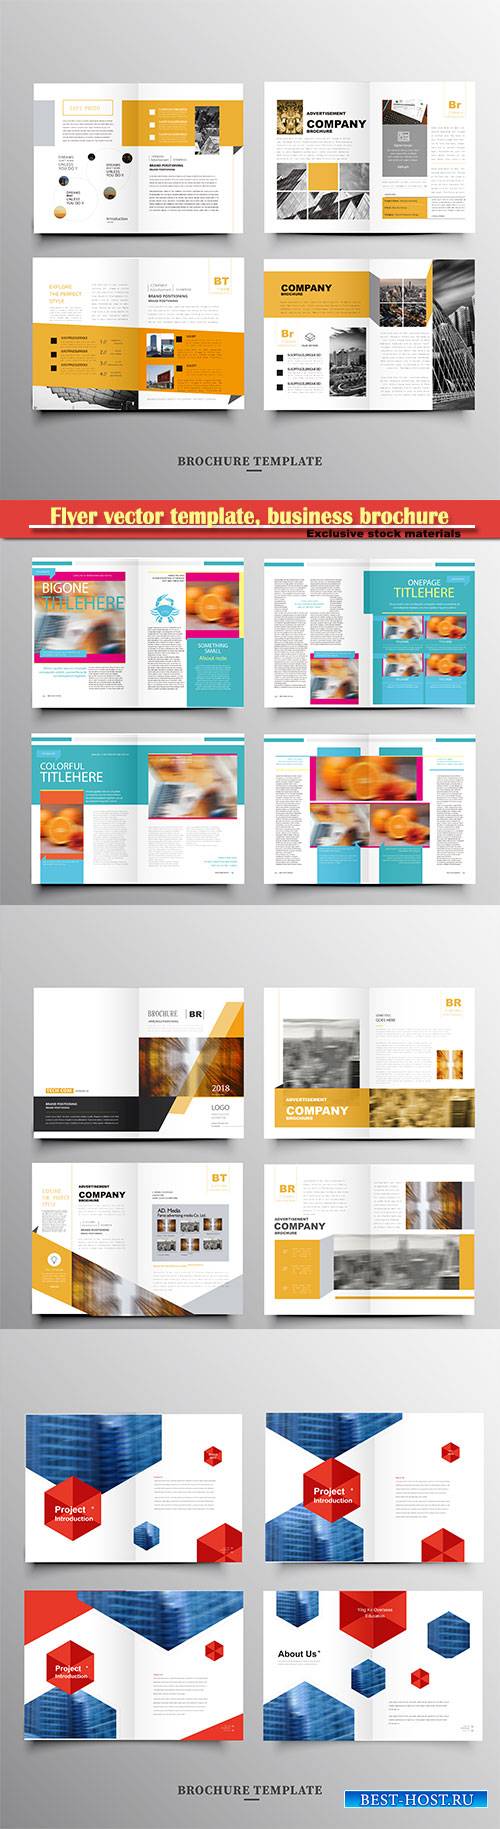 Flyer vector template, business brochure, magazine cover # 30